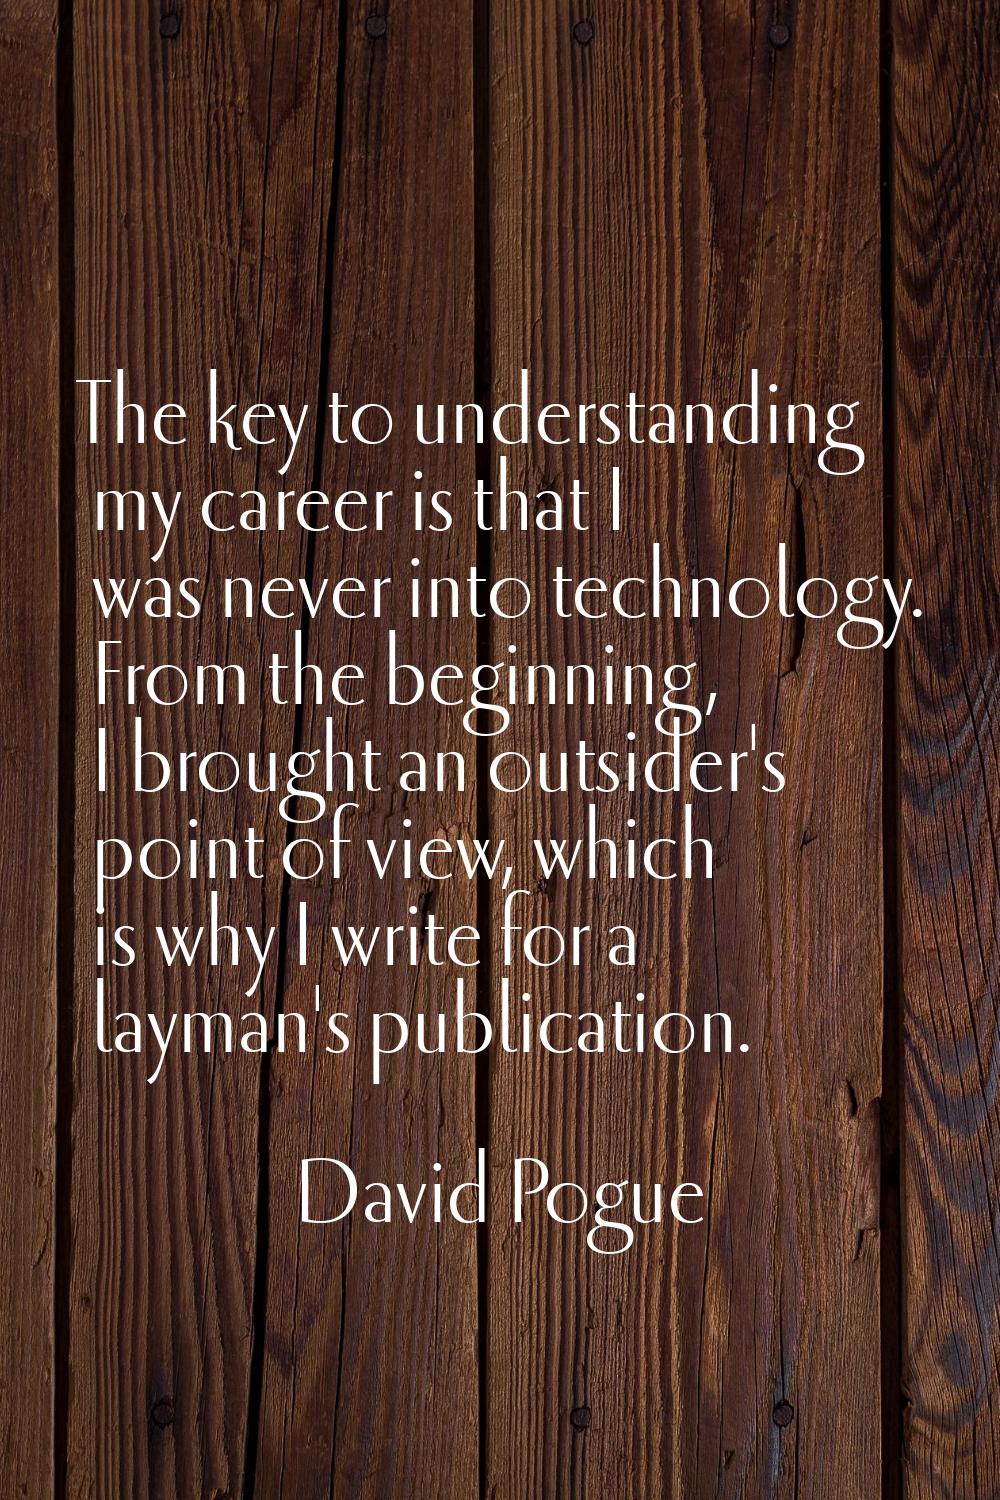 The key to understanding my career is that I was never into technology. From the beginning, I broug